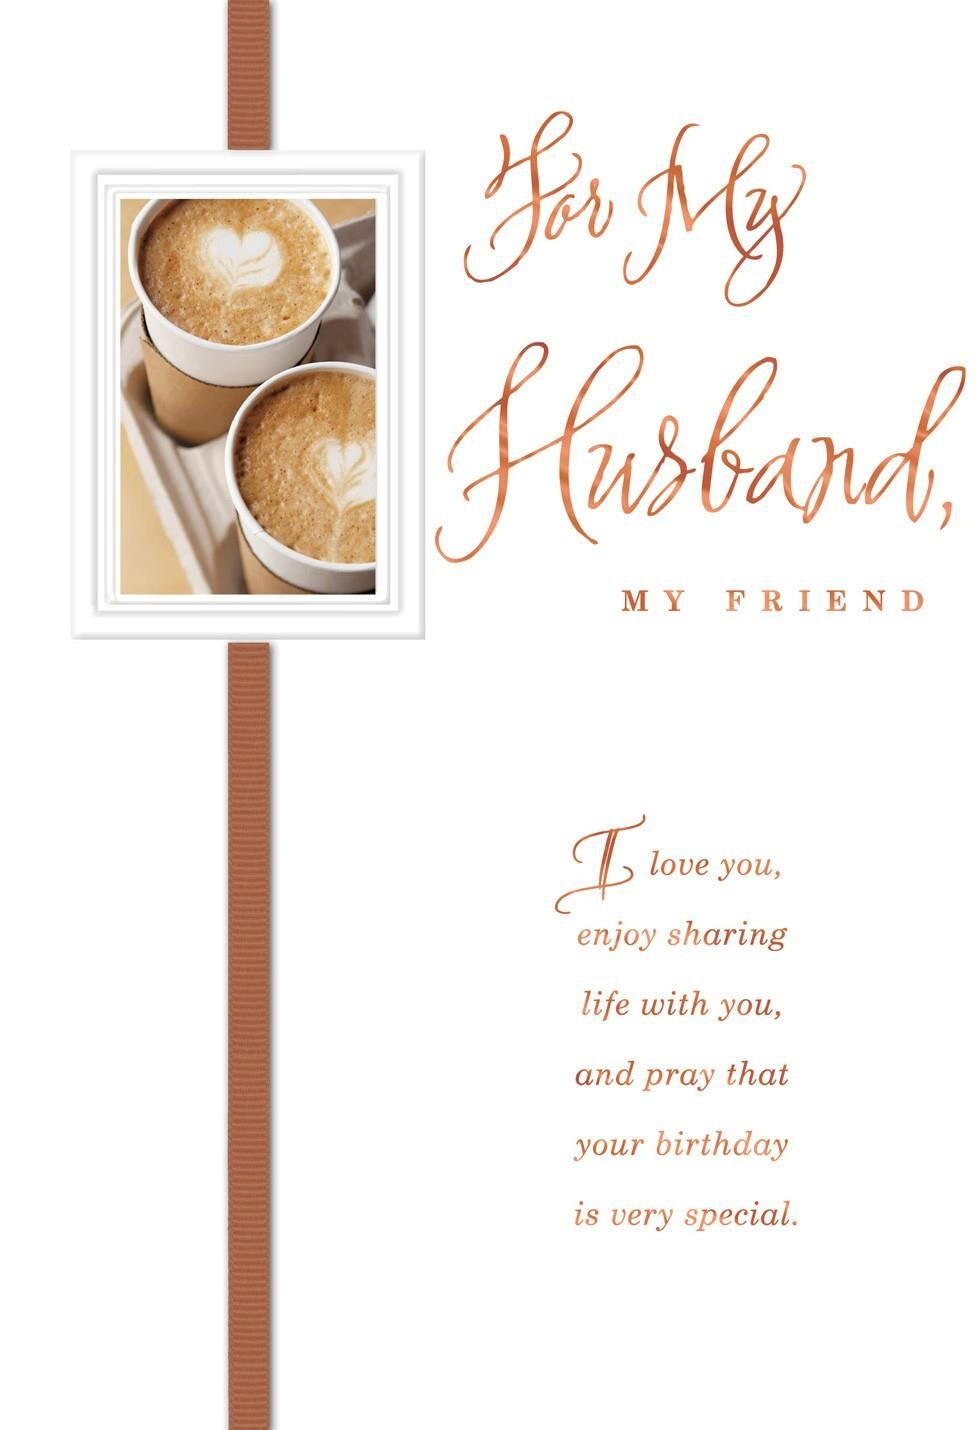 Christian Birthday Wishes For Husband
 DaySpring Christian and Religious Greeting Cards